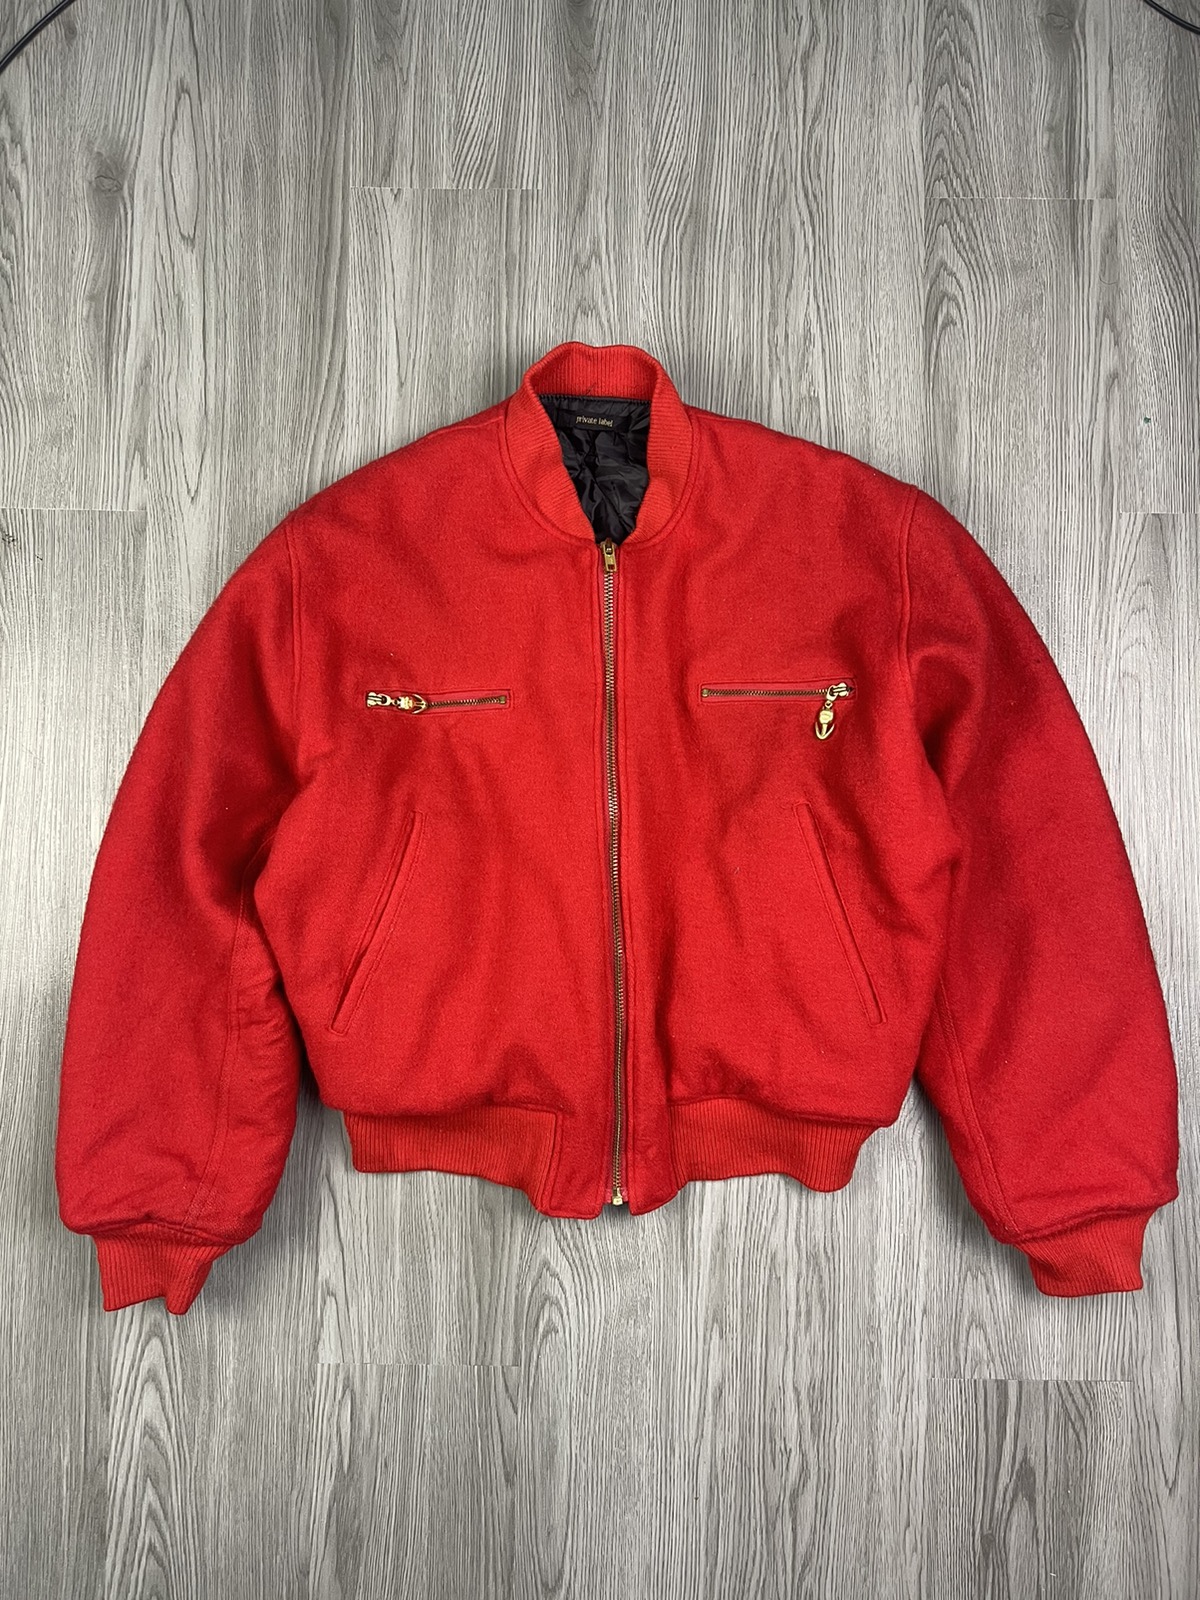 Japanese Brand - Unisex Red Private Label Back Hit Tulipan Wool Bomber Jacket - 3